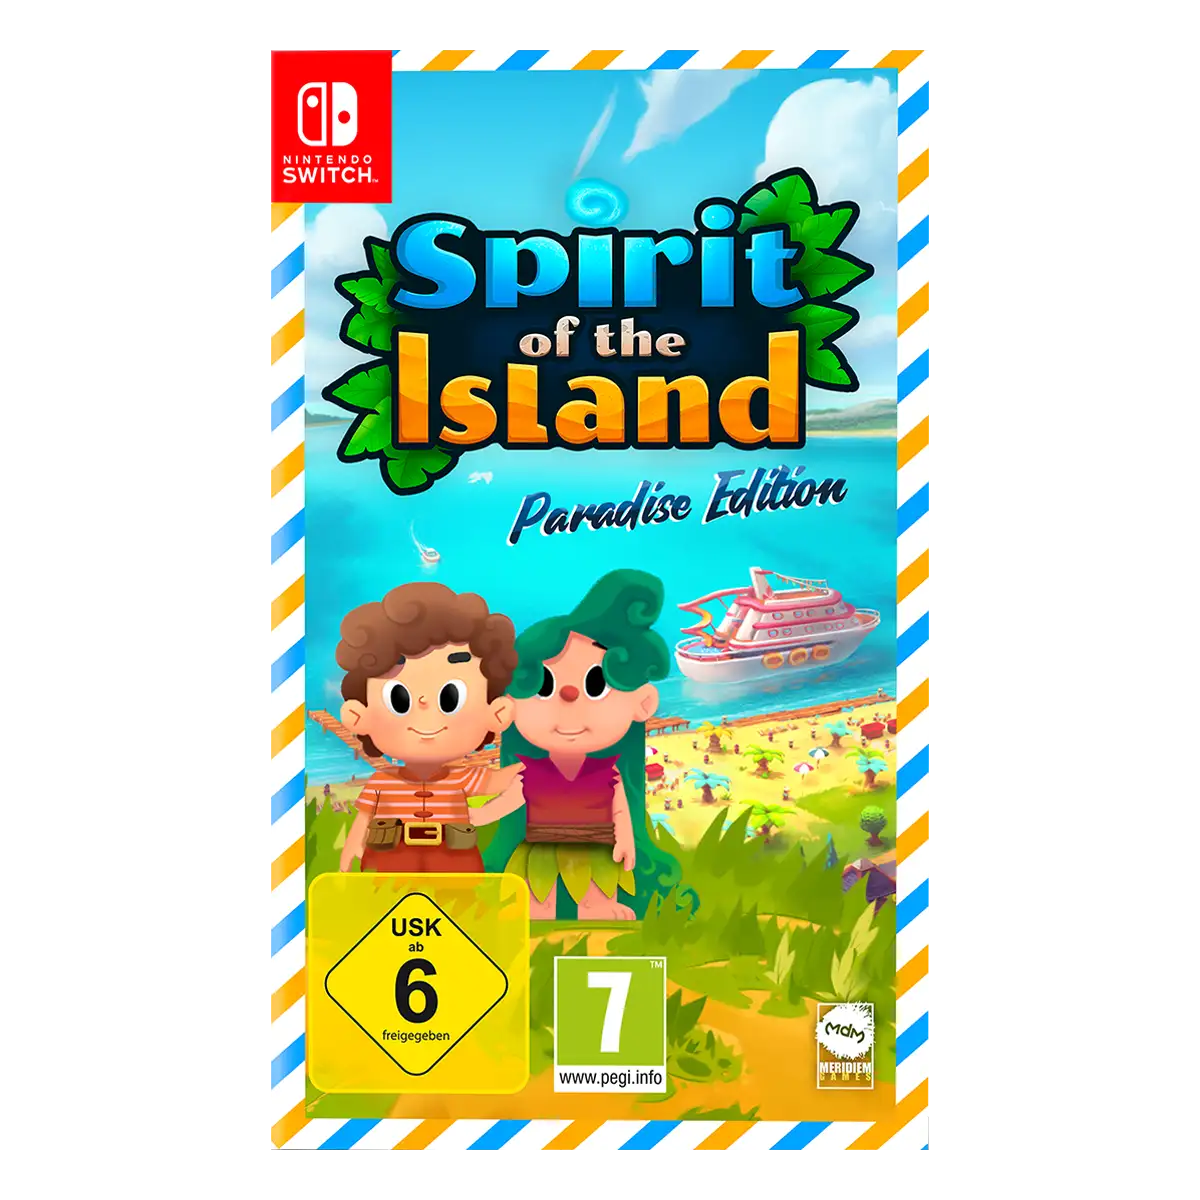 Island　Game　(Switch)　the　of　Spirit　Legends